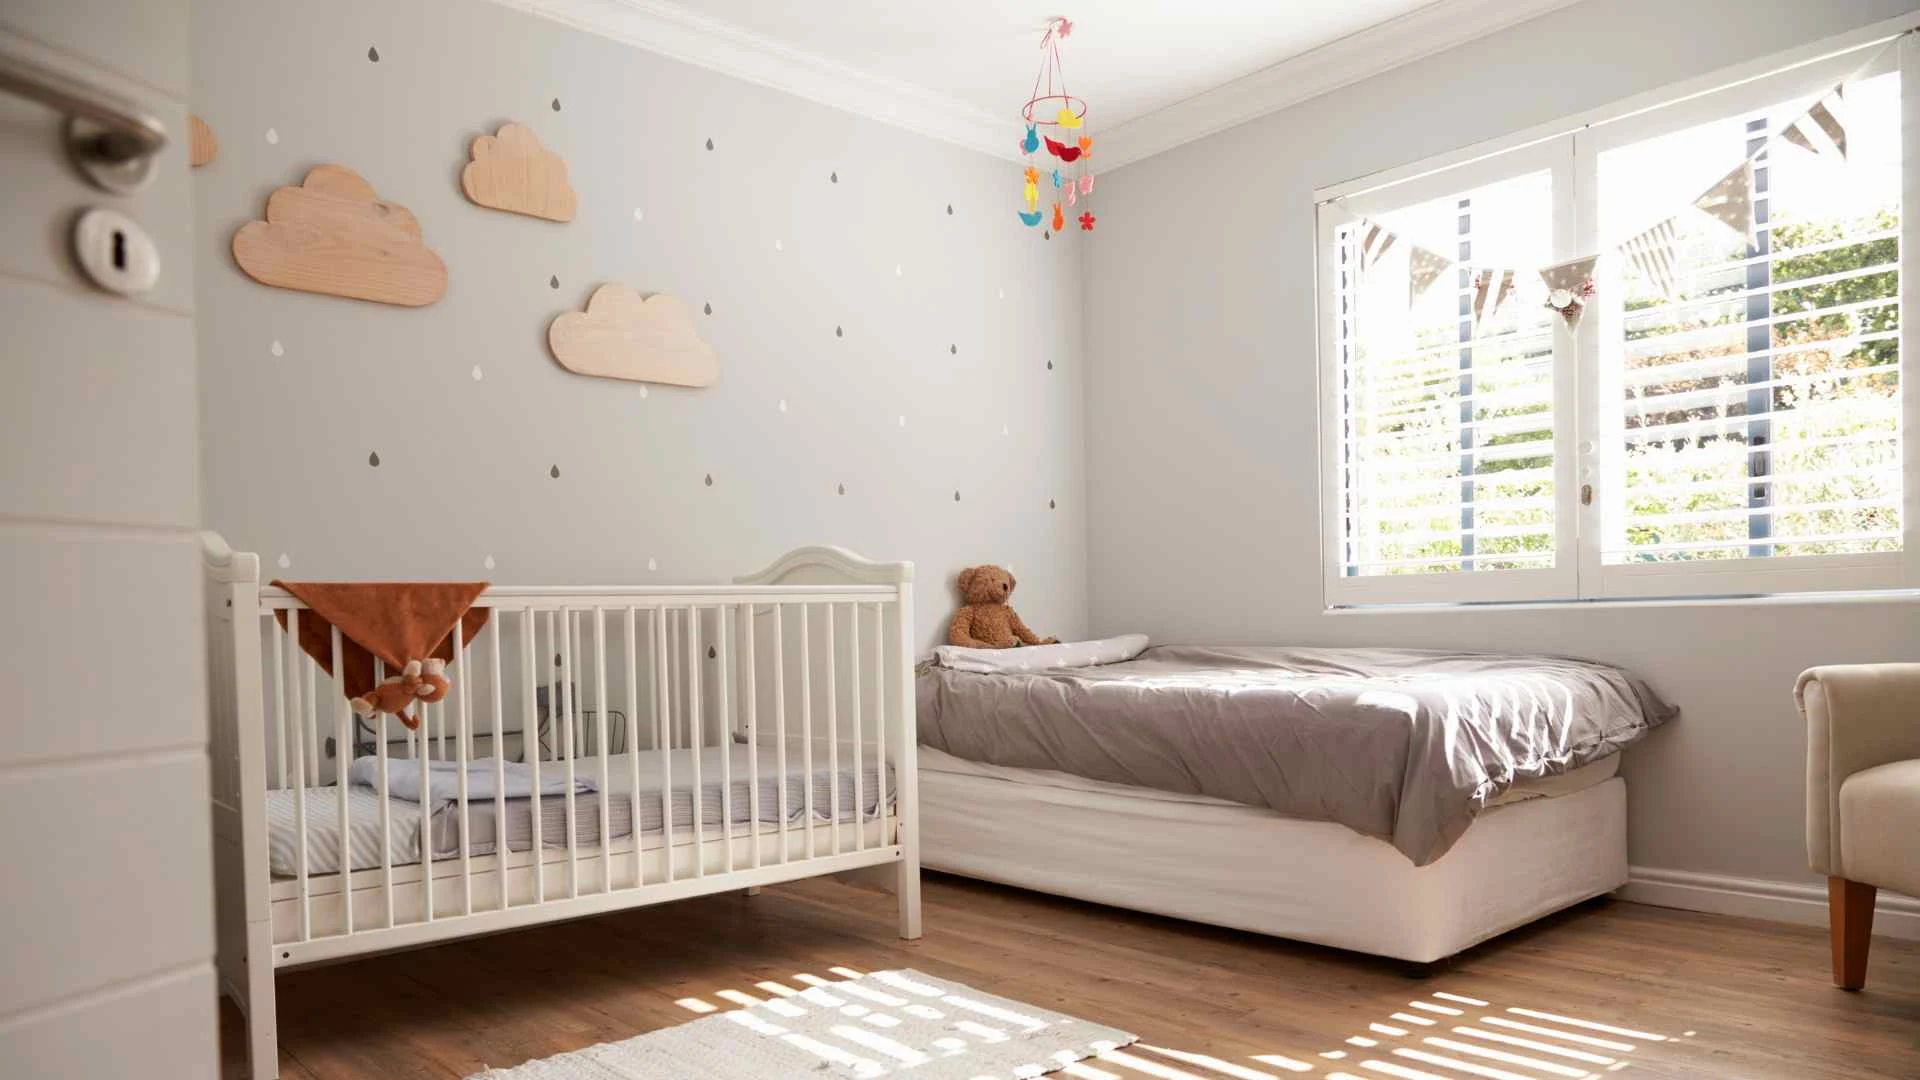 Nursery bedroom from Canva pro stock images